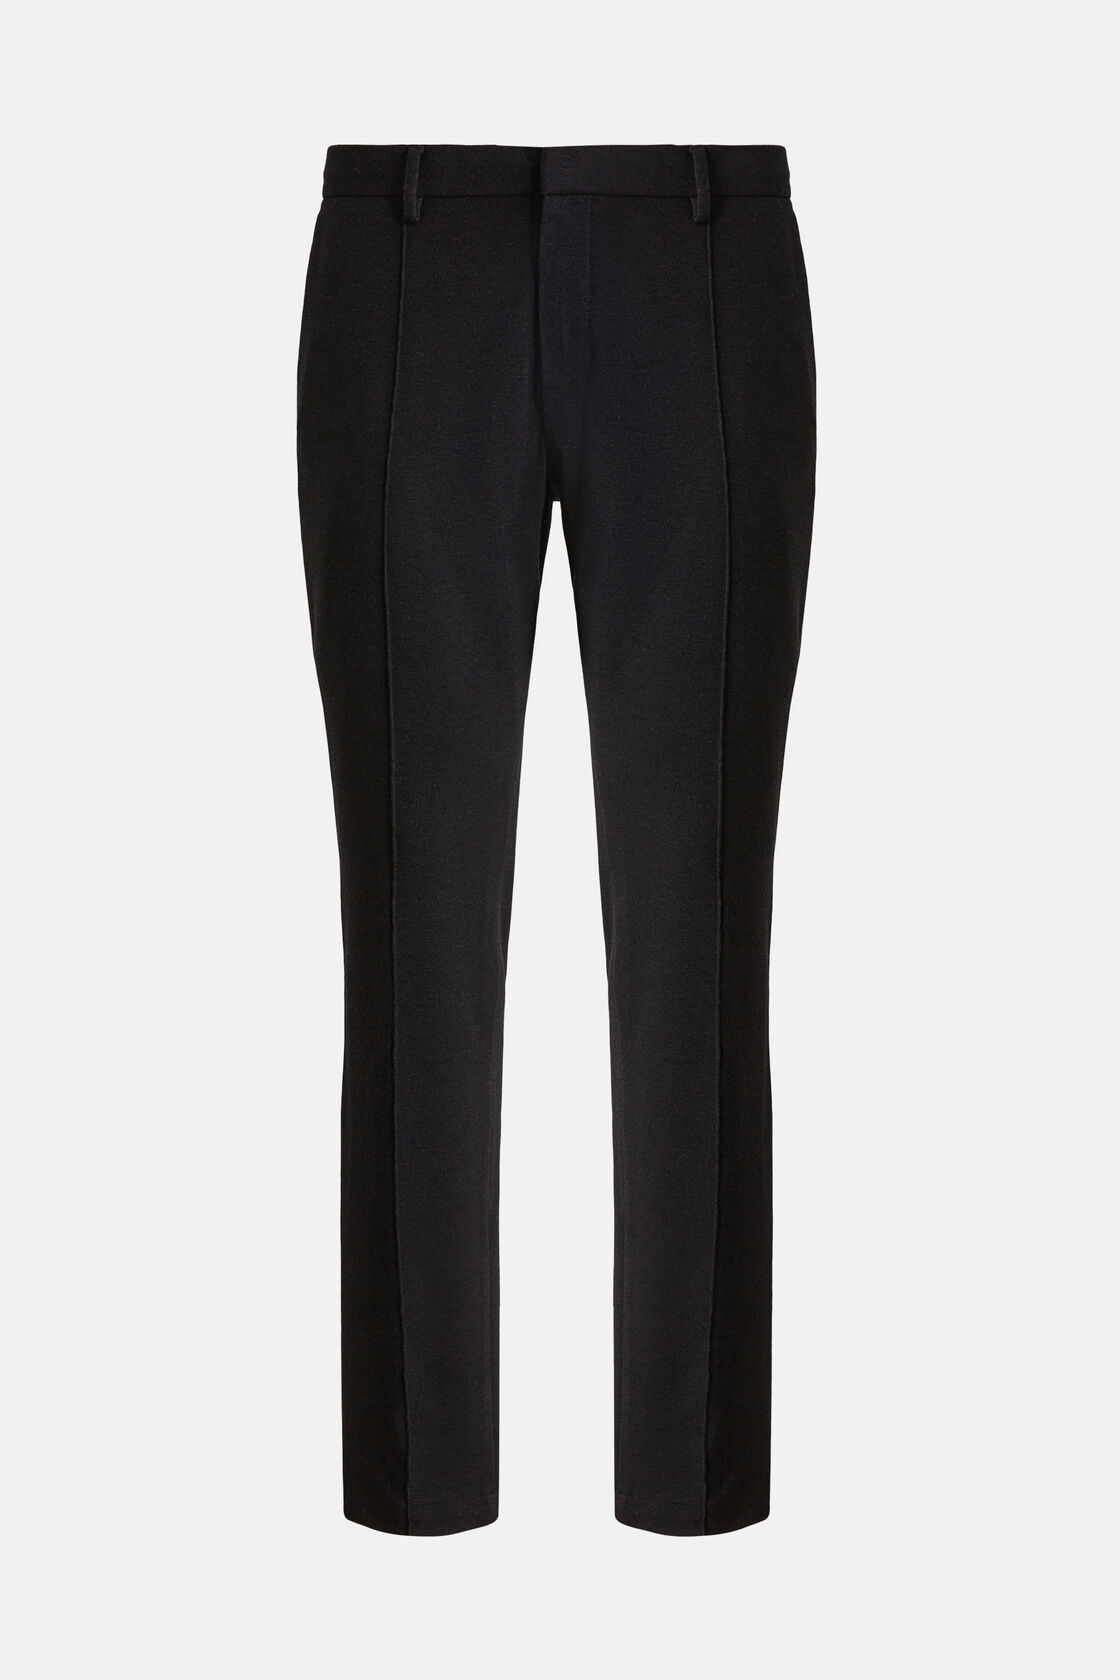 Trousers in a Stretch Viscose and Nylon blend, Navy blue, hi-res